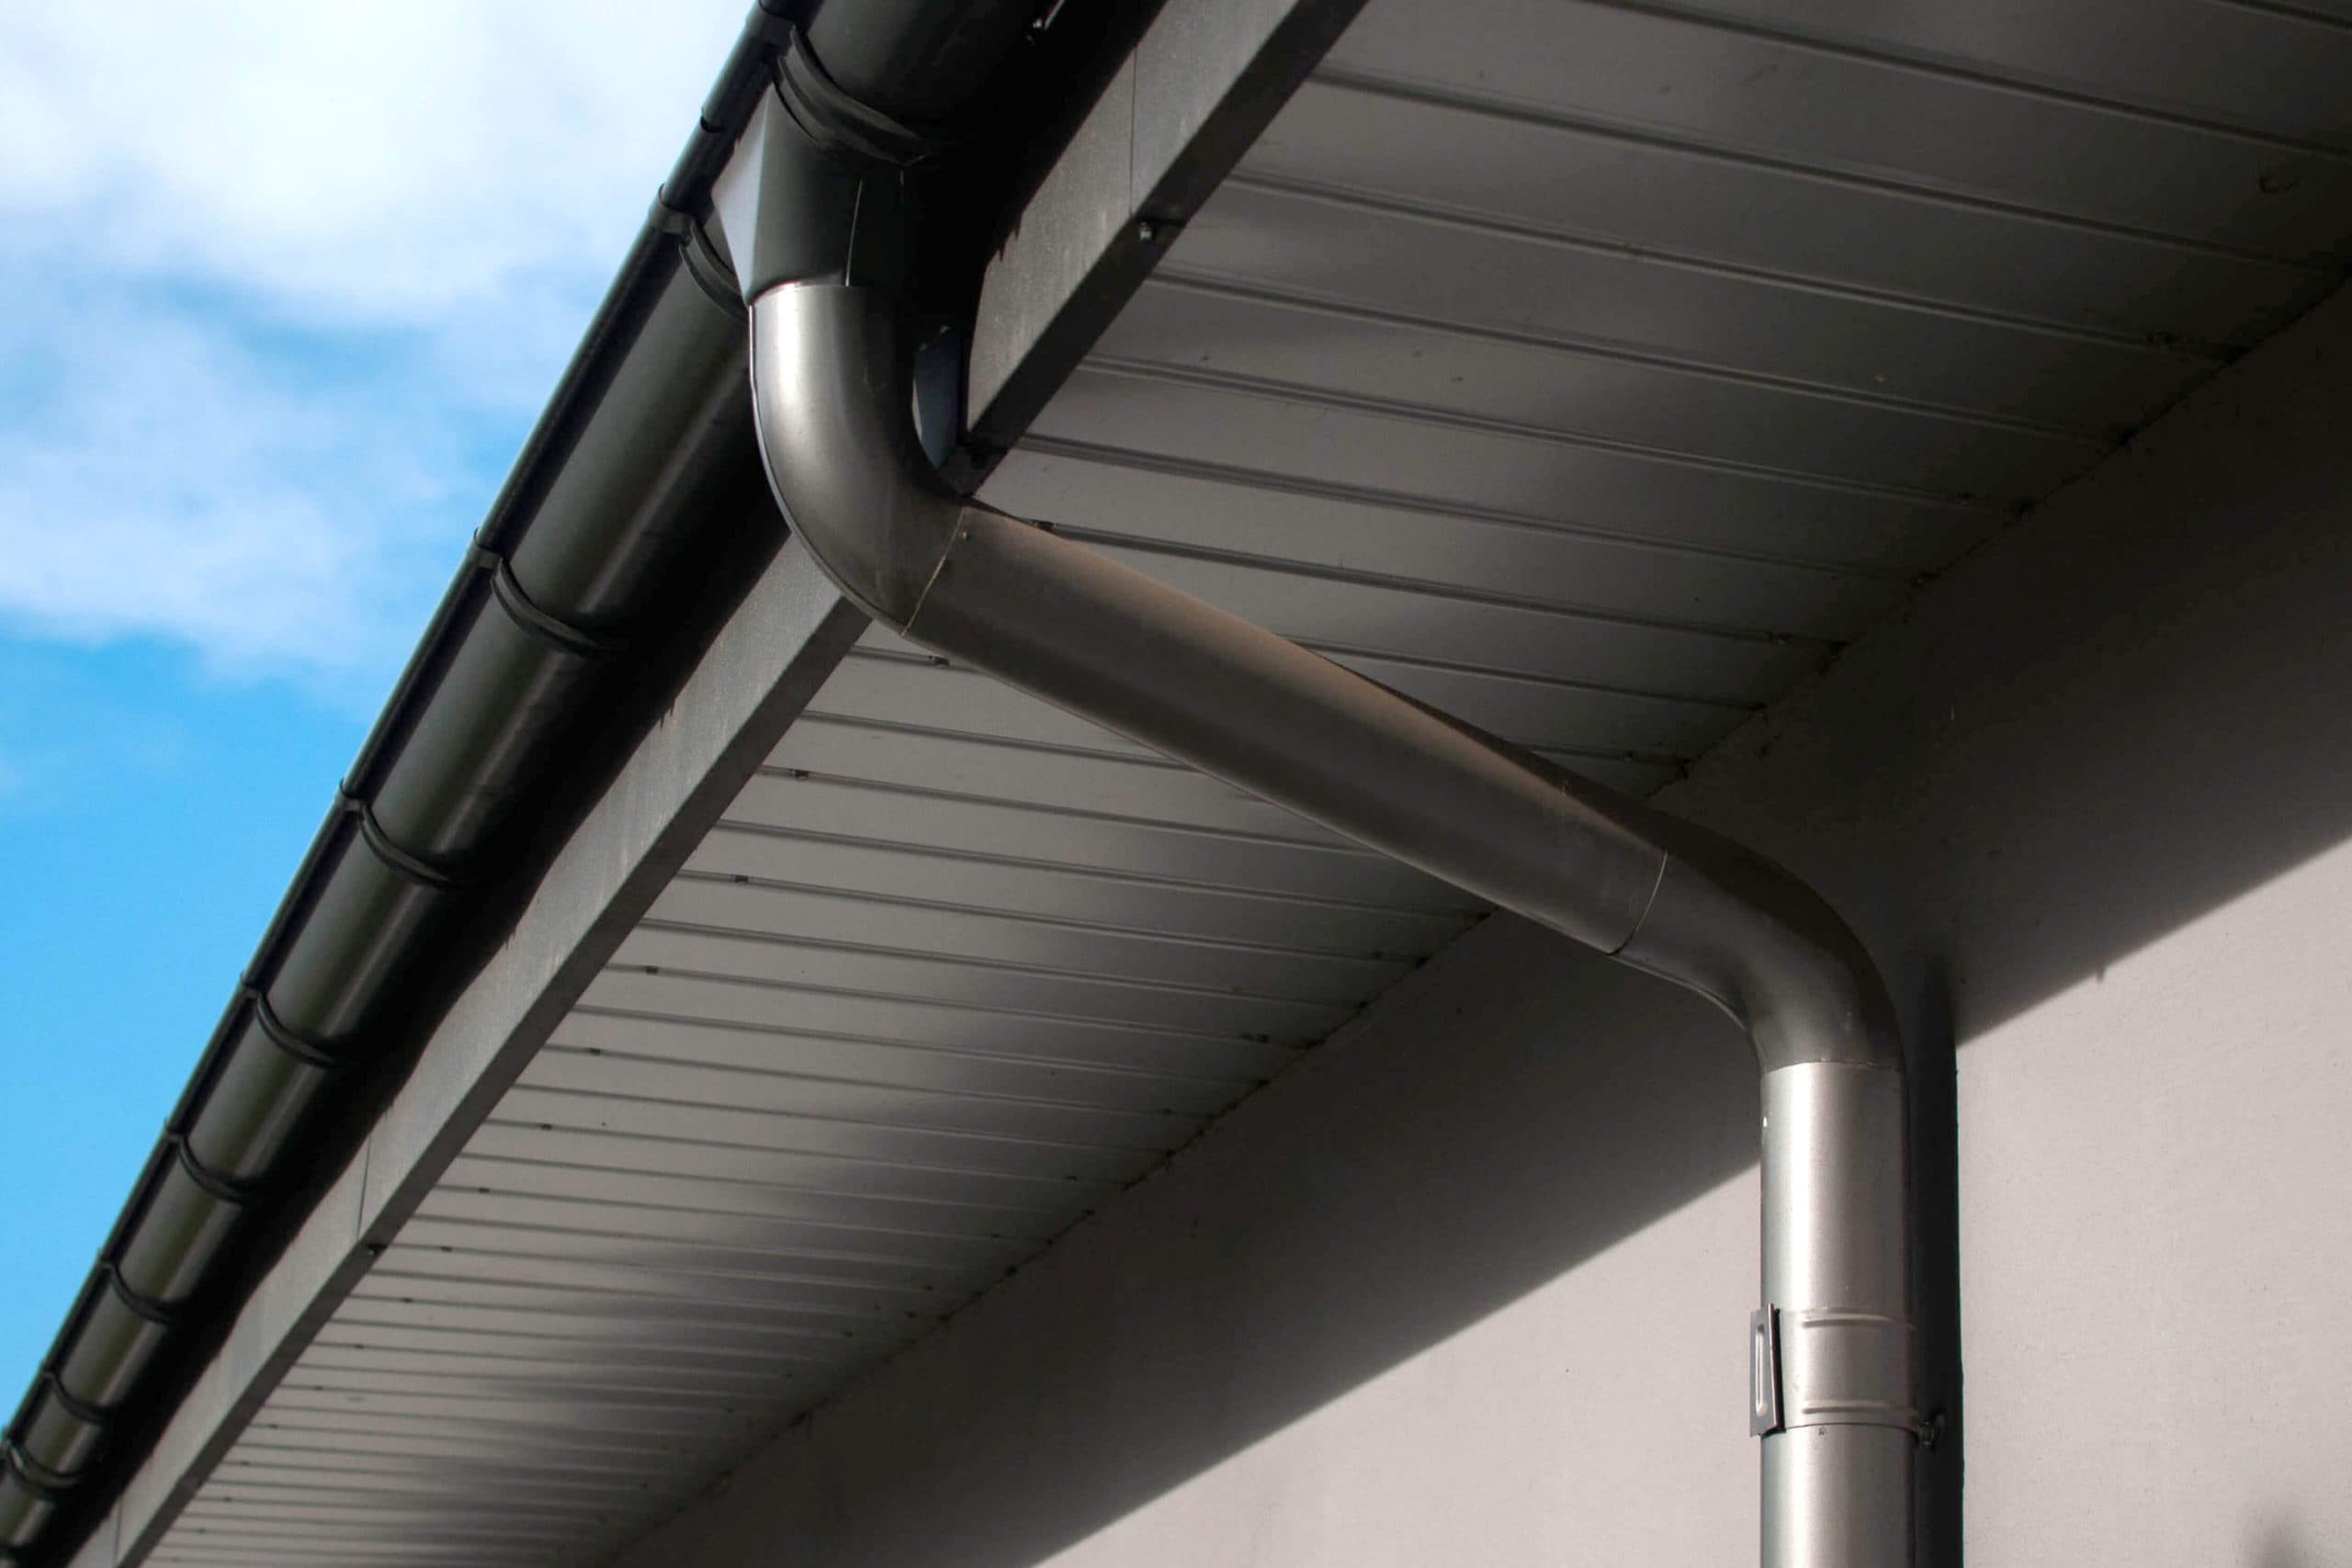 Reliable and affordable Galvanized gutters installation in Panama City